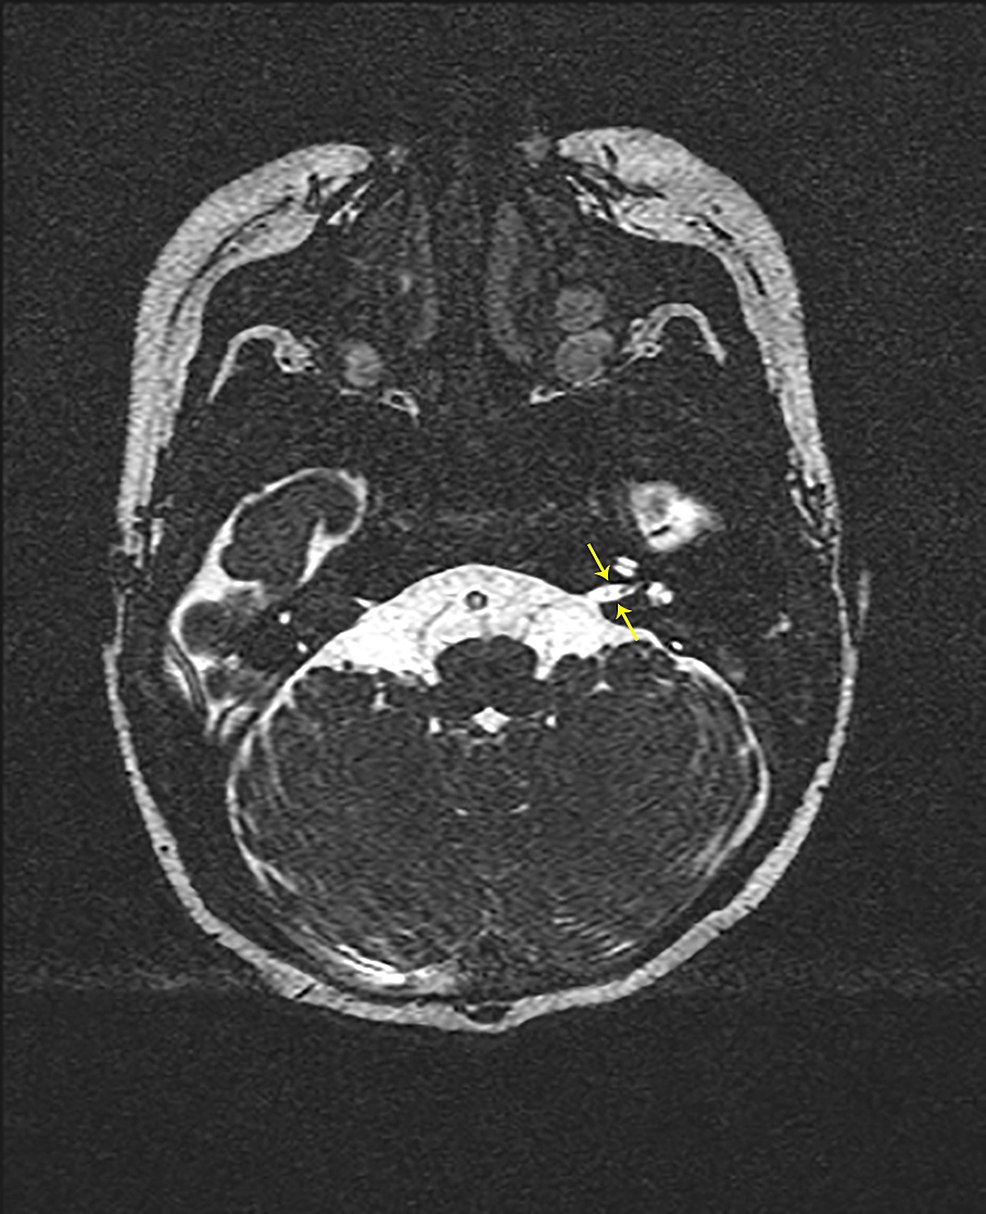 mri of internal auditory canal images which cranial